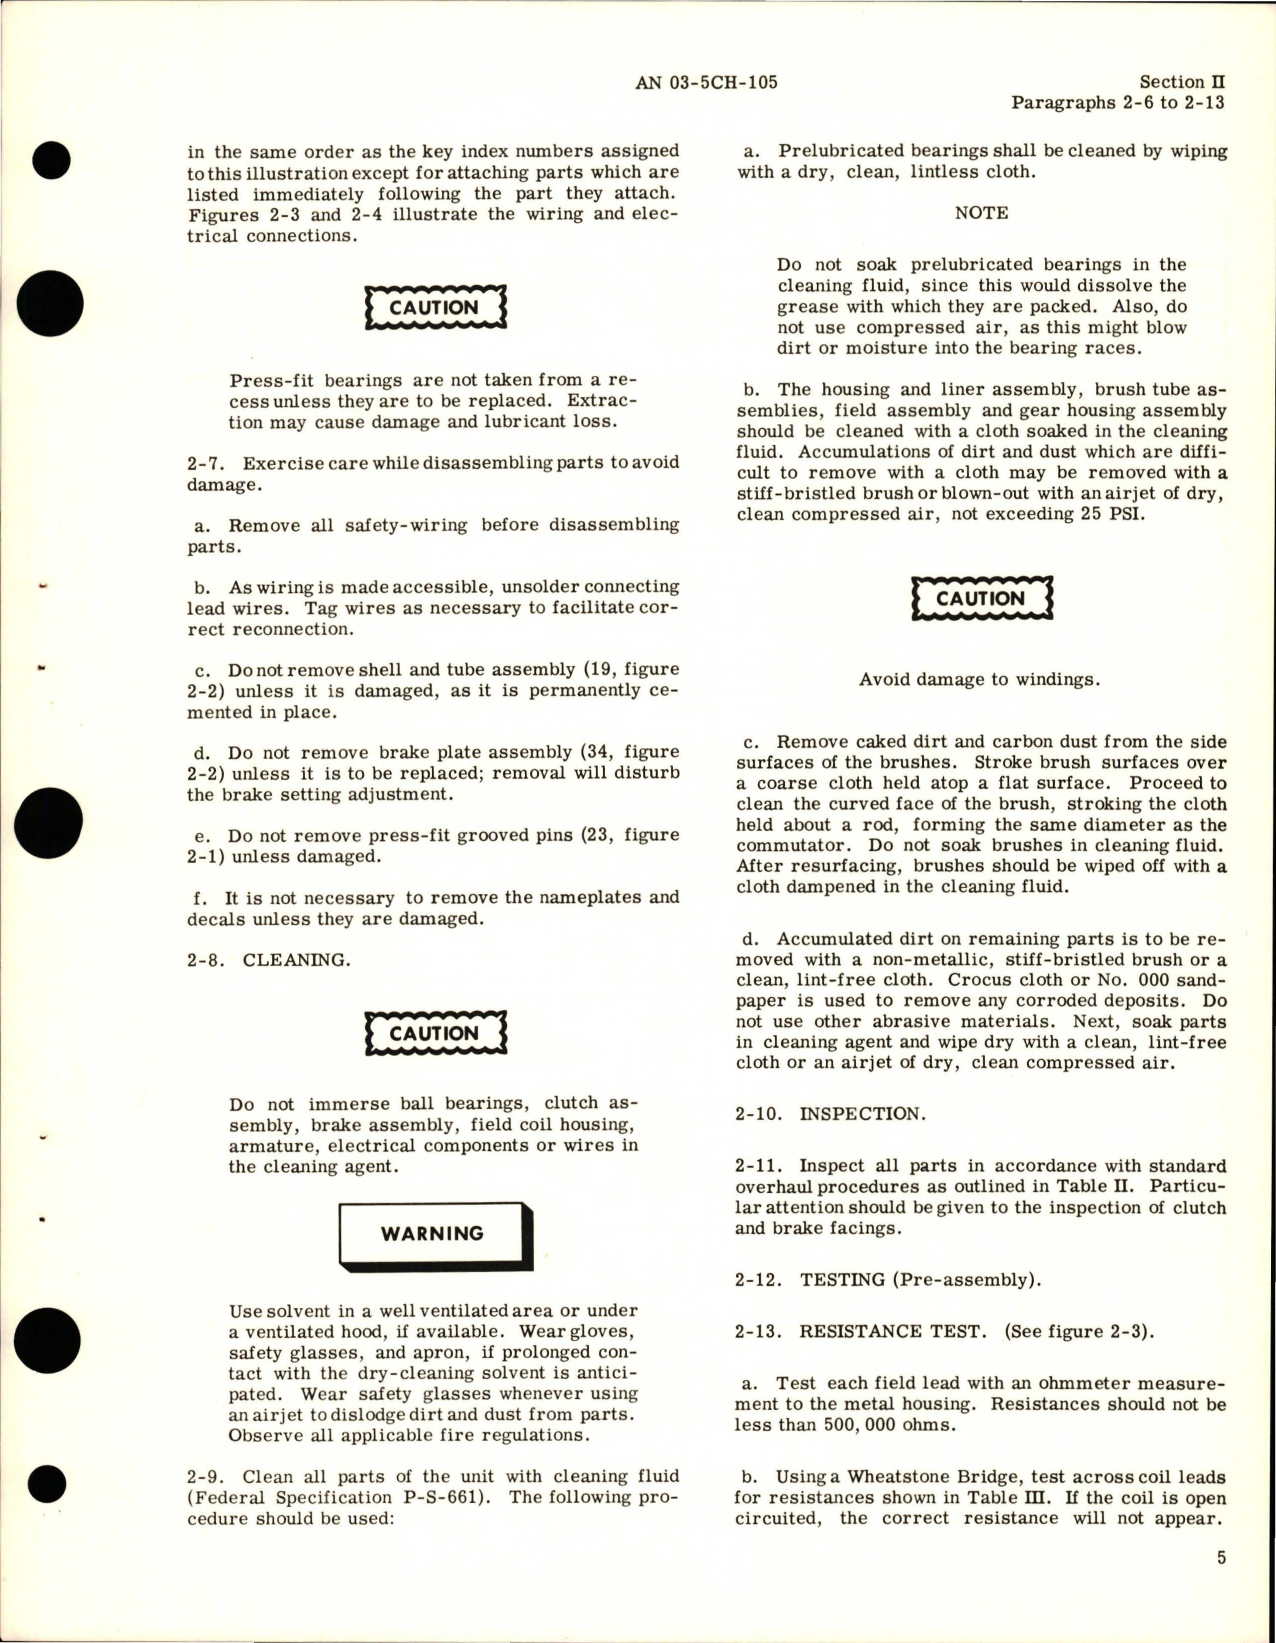 Sample page 9 from AirCorps Library document: Overhaul Instructions for Linear Actuator - Model M-2975, M-2975M2, M-2975M3, M-2975M4, M-2975M5, and M-2975M6